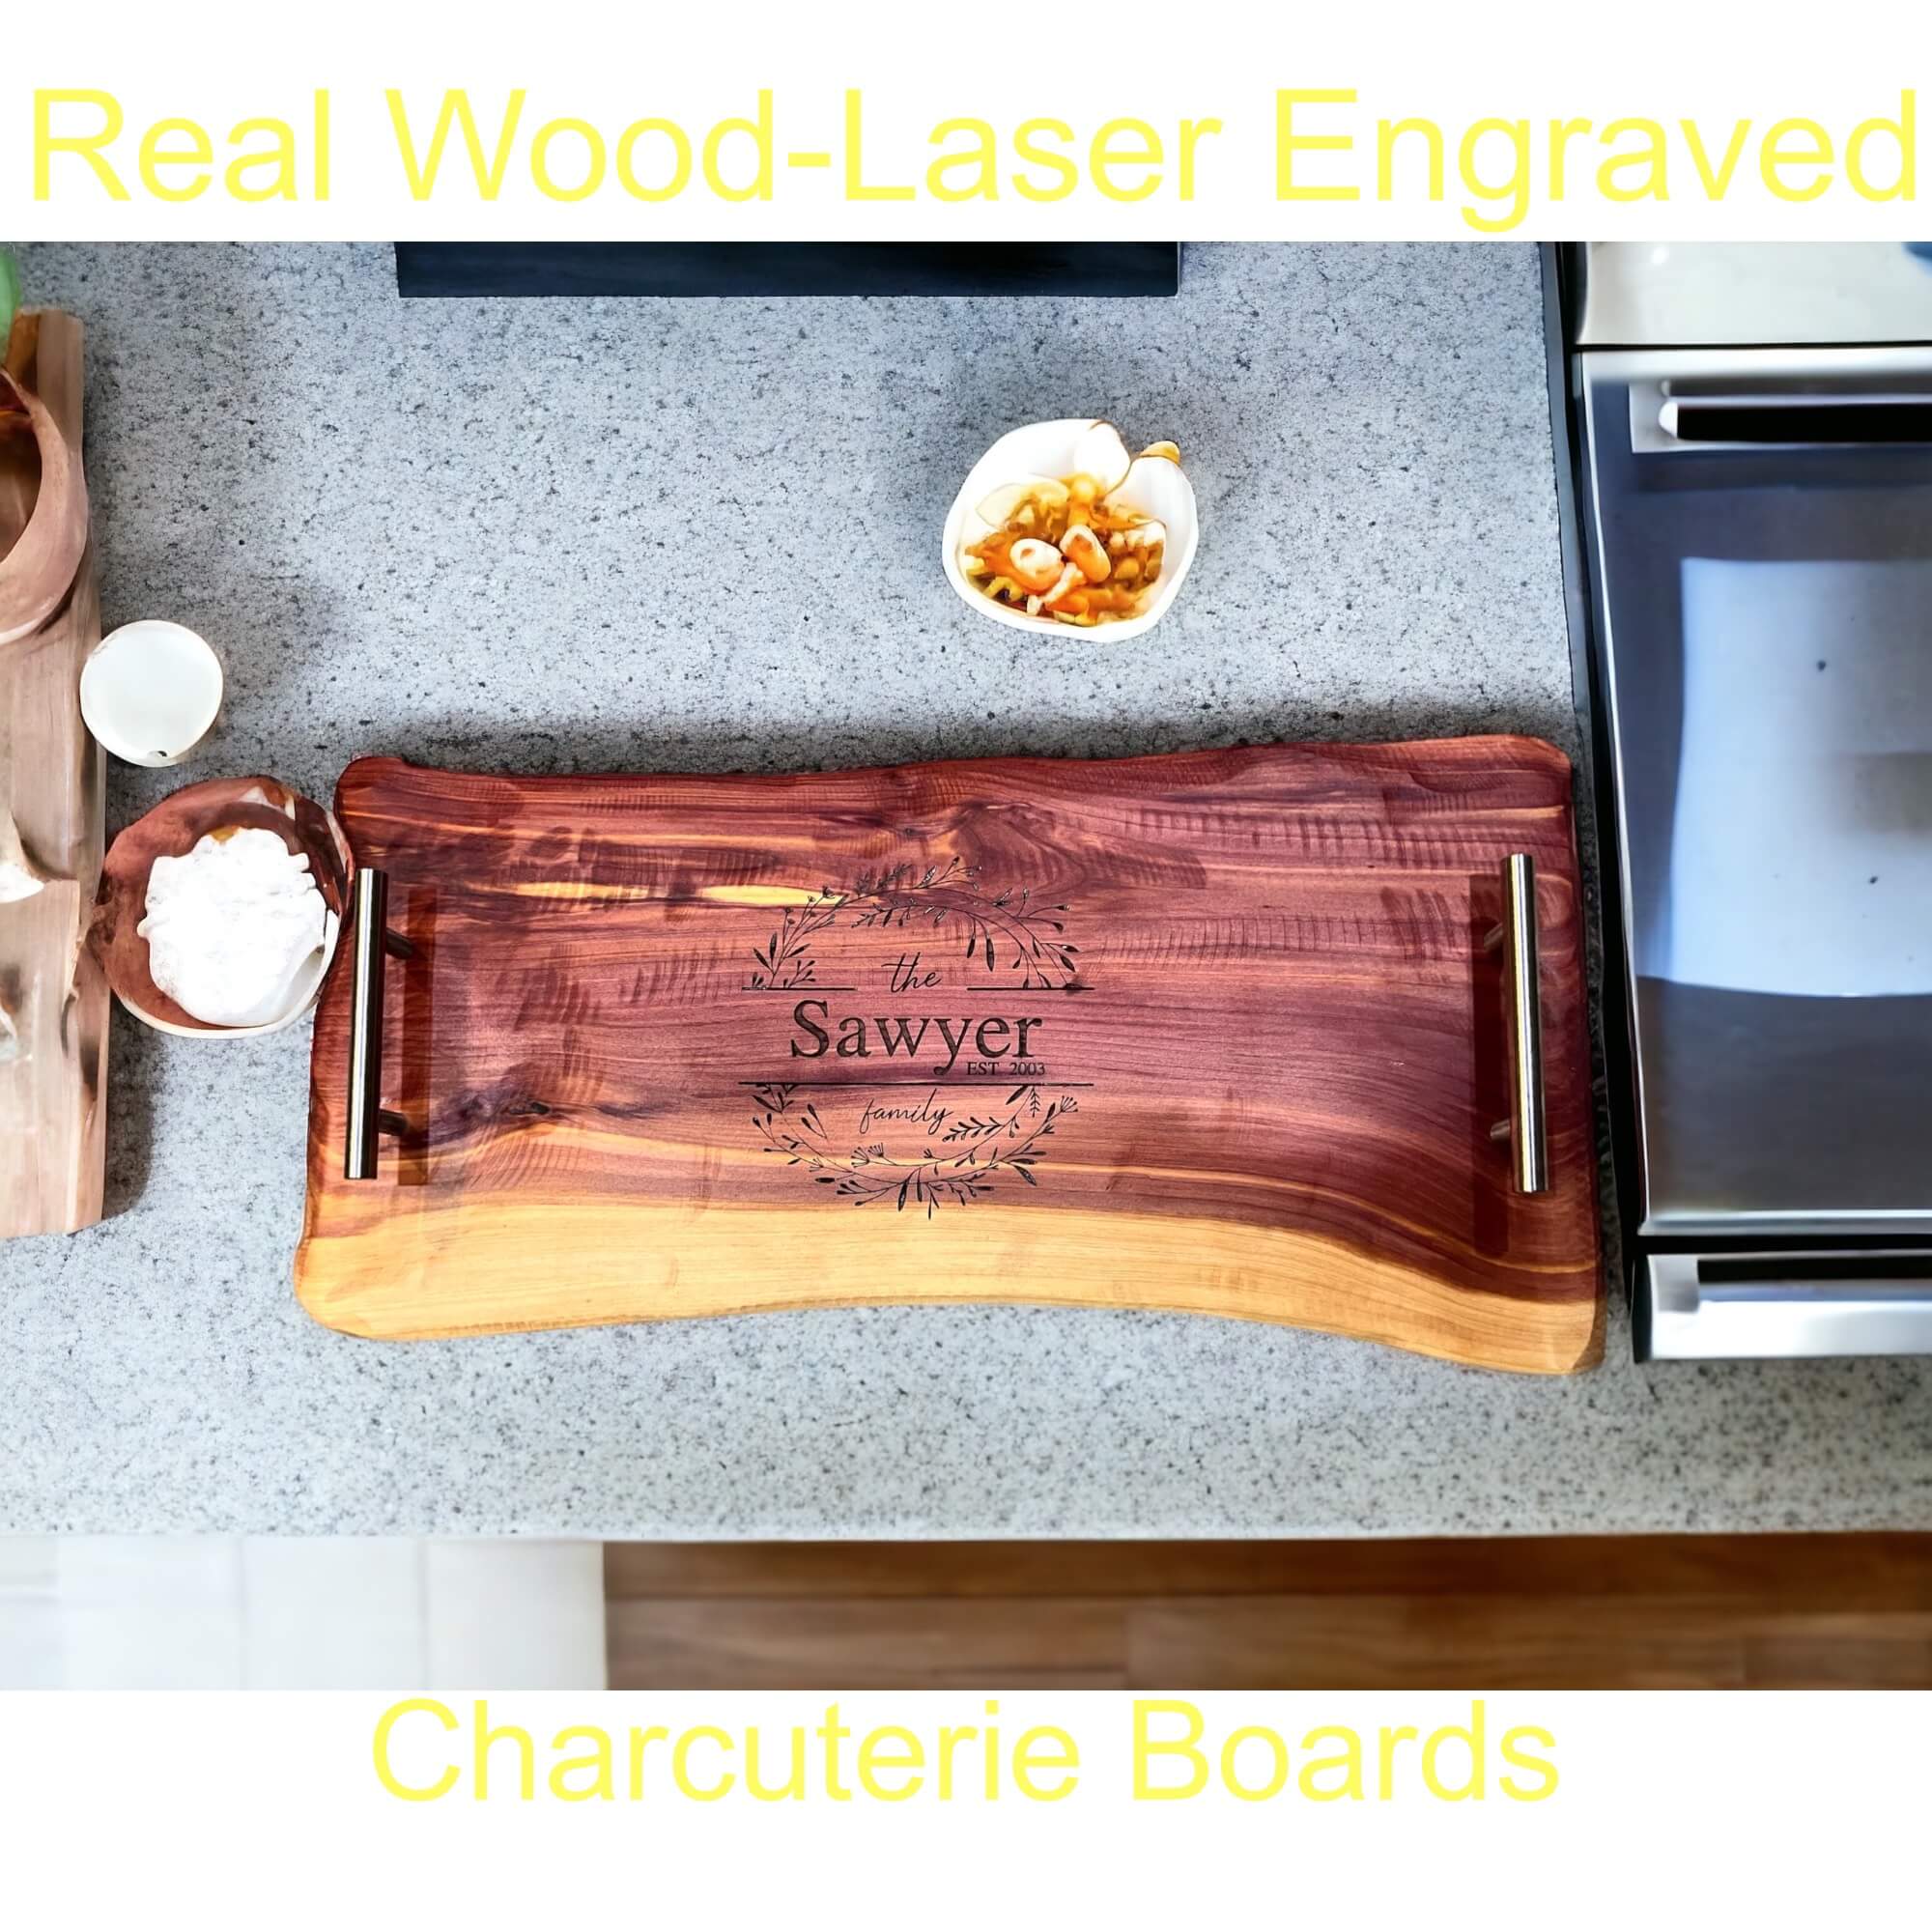 Create lasting memories around the table with our unique anniversary gift – a personalized cedar charcuterie board.